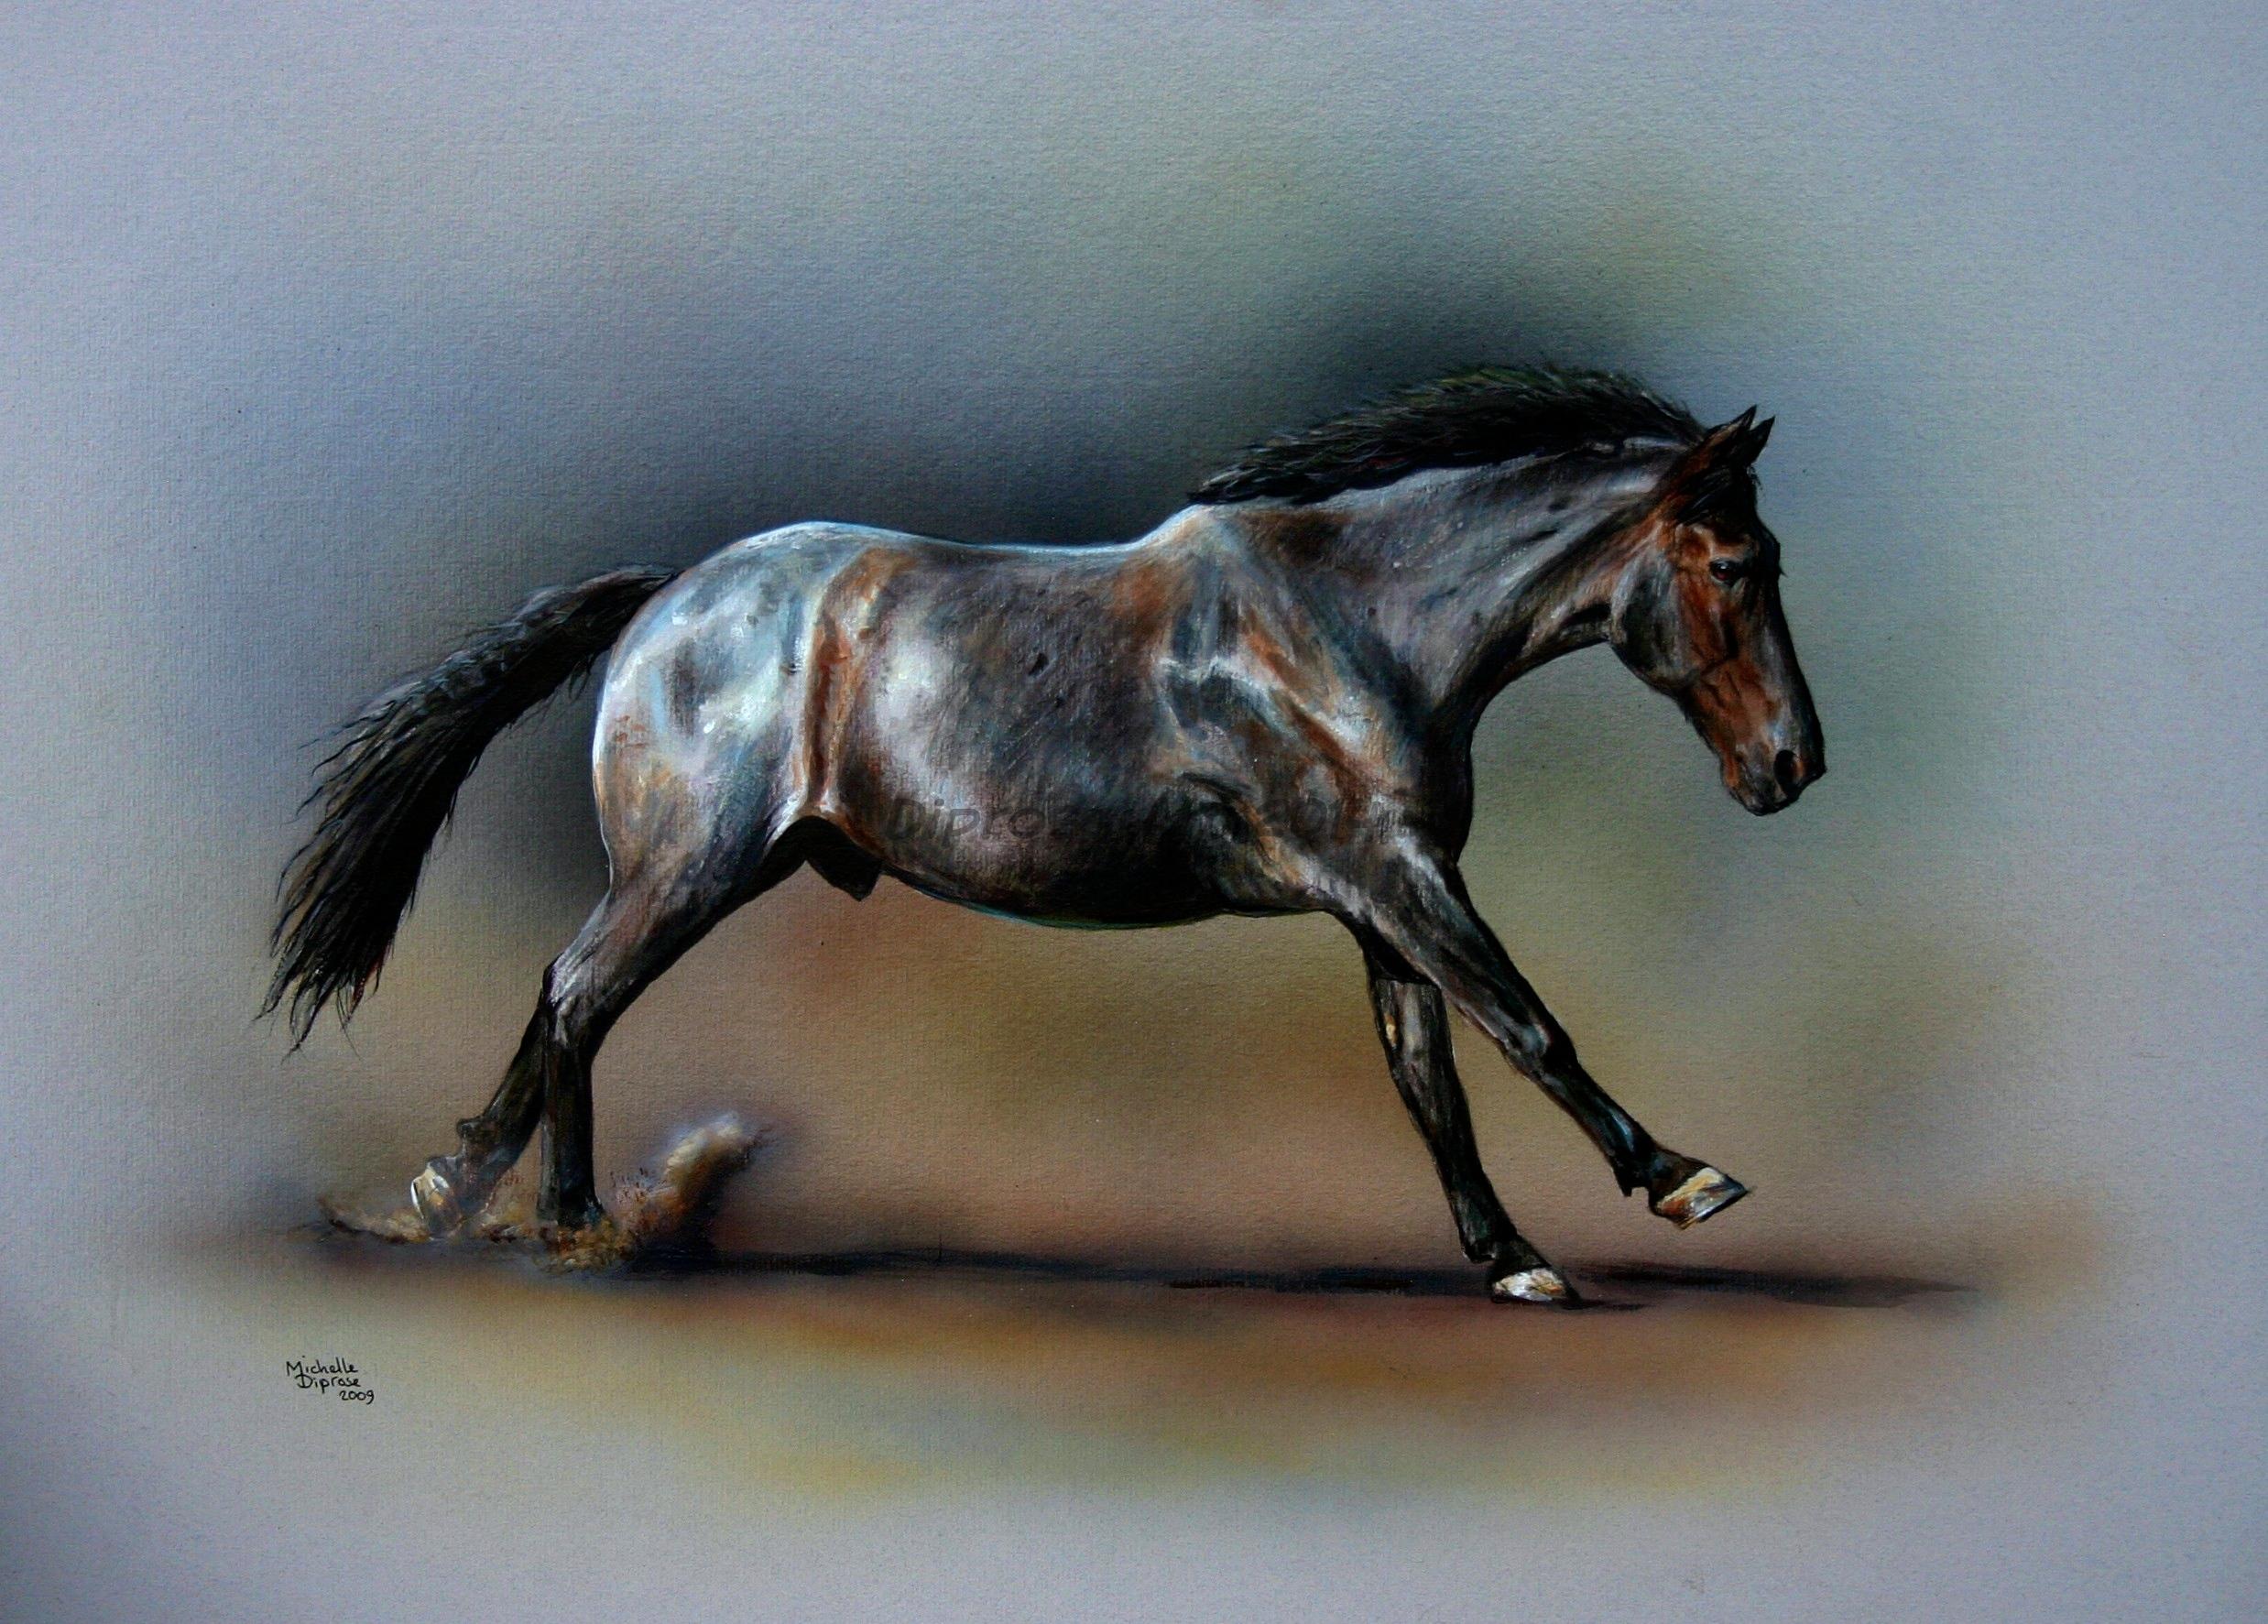 Acylics on board - A3 approx - horse portrait - Benson was probably the most unusually coloured horse I have ever painted - he was a blue roan - sort of - with brown bits - kind of a dark gun metal shade - a big fella too!  He was wonderful.